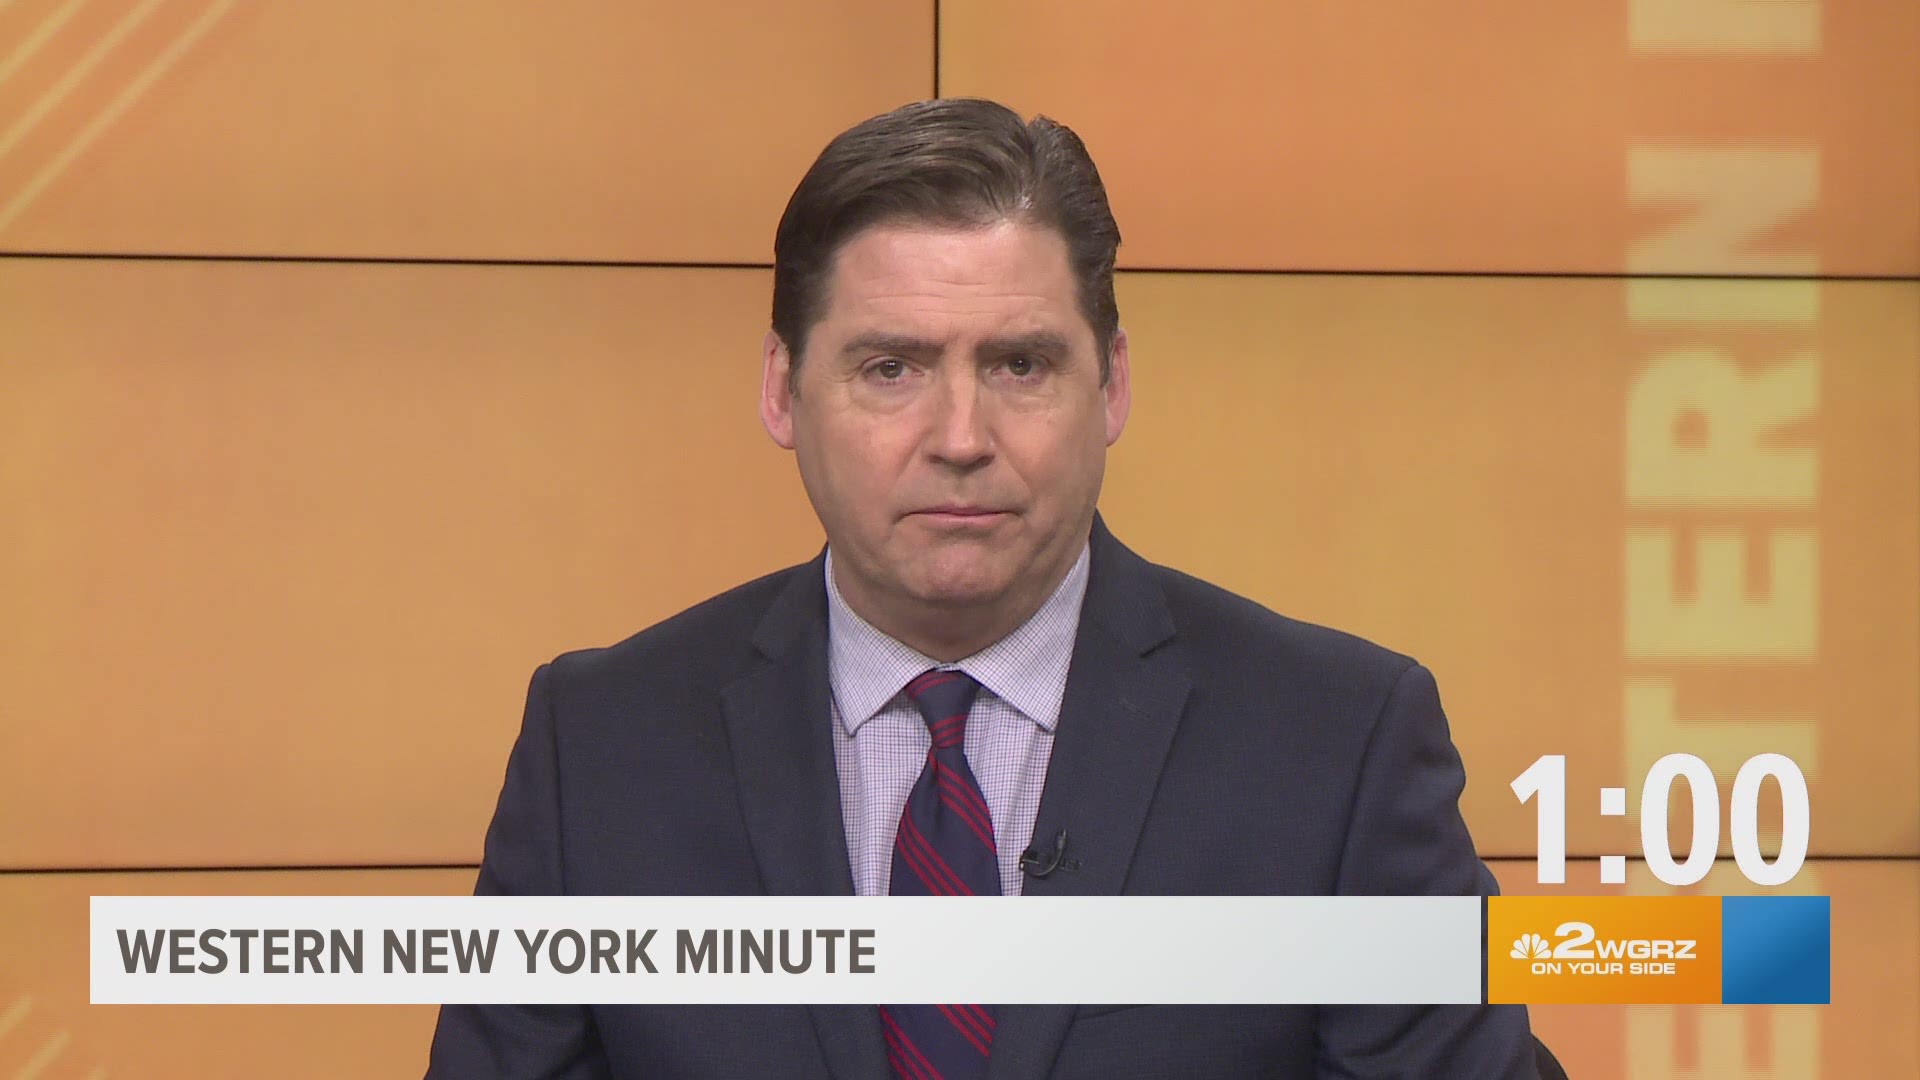 A meeting on Lake Ontario, a BPD cruiser stolen & crashed, and the ECWA is looking for a new leader. Those stories and more in today's WNY Minute.